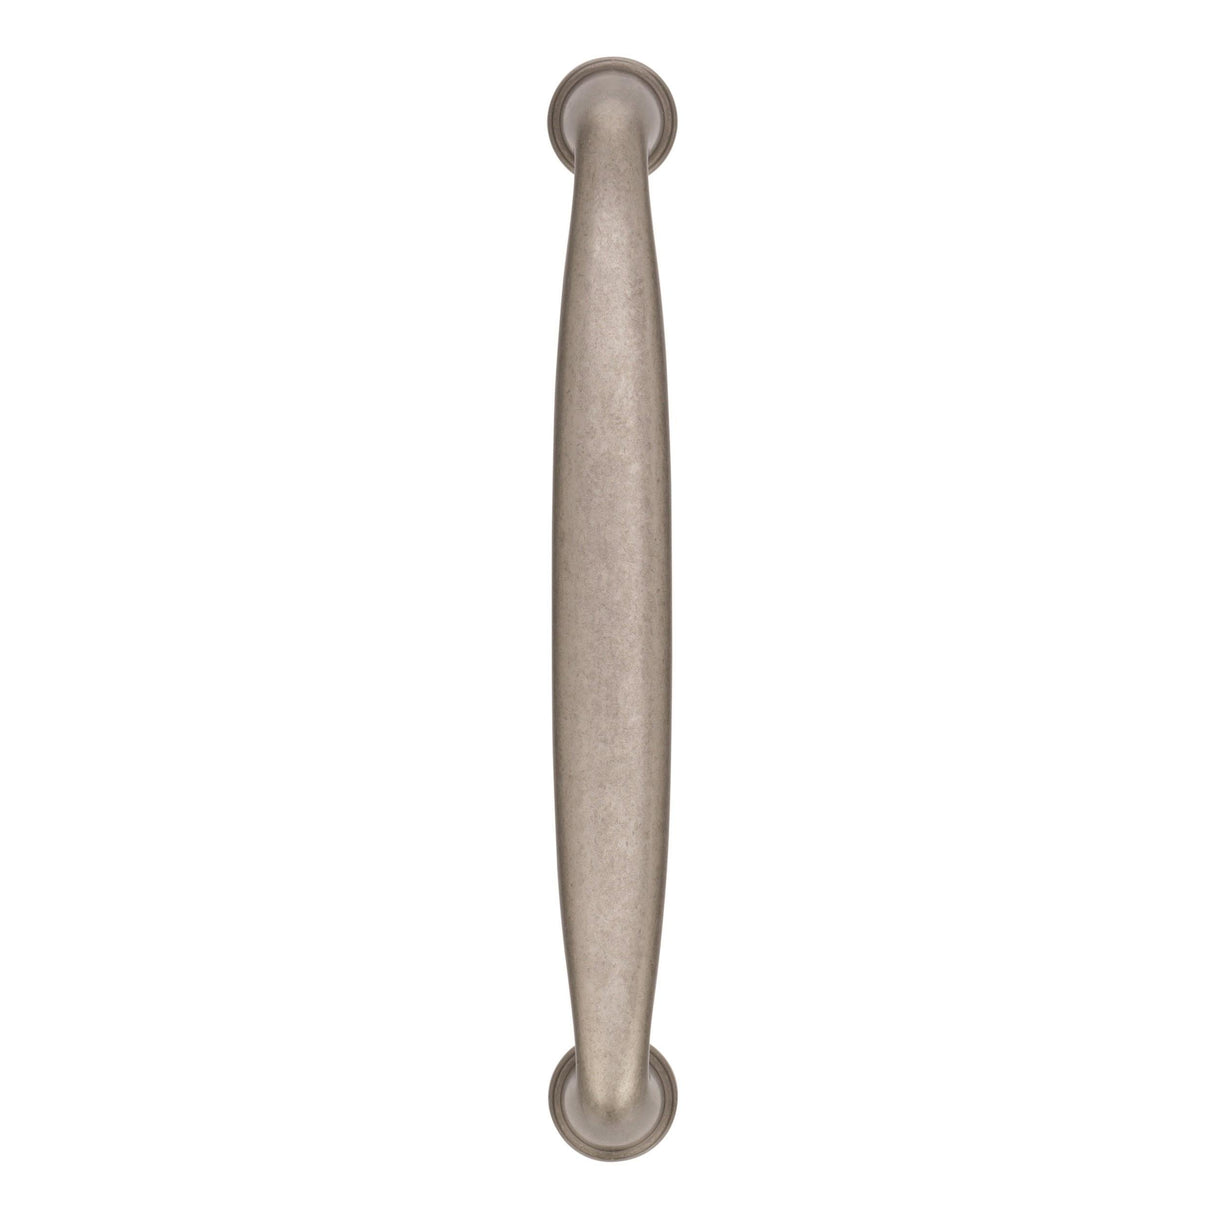 Amerock Cabinet Pull Weathered Nickel 5-1/16 inch (128 mm) Center to Center Kane 1 Pack Drawer Pull Drawer Handle Cabinet Hardware